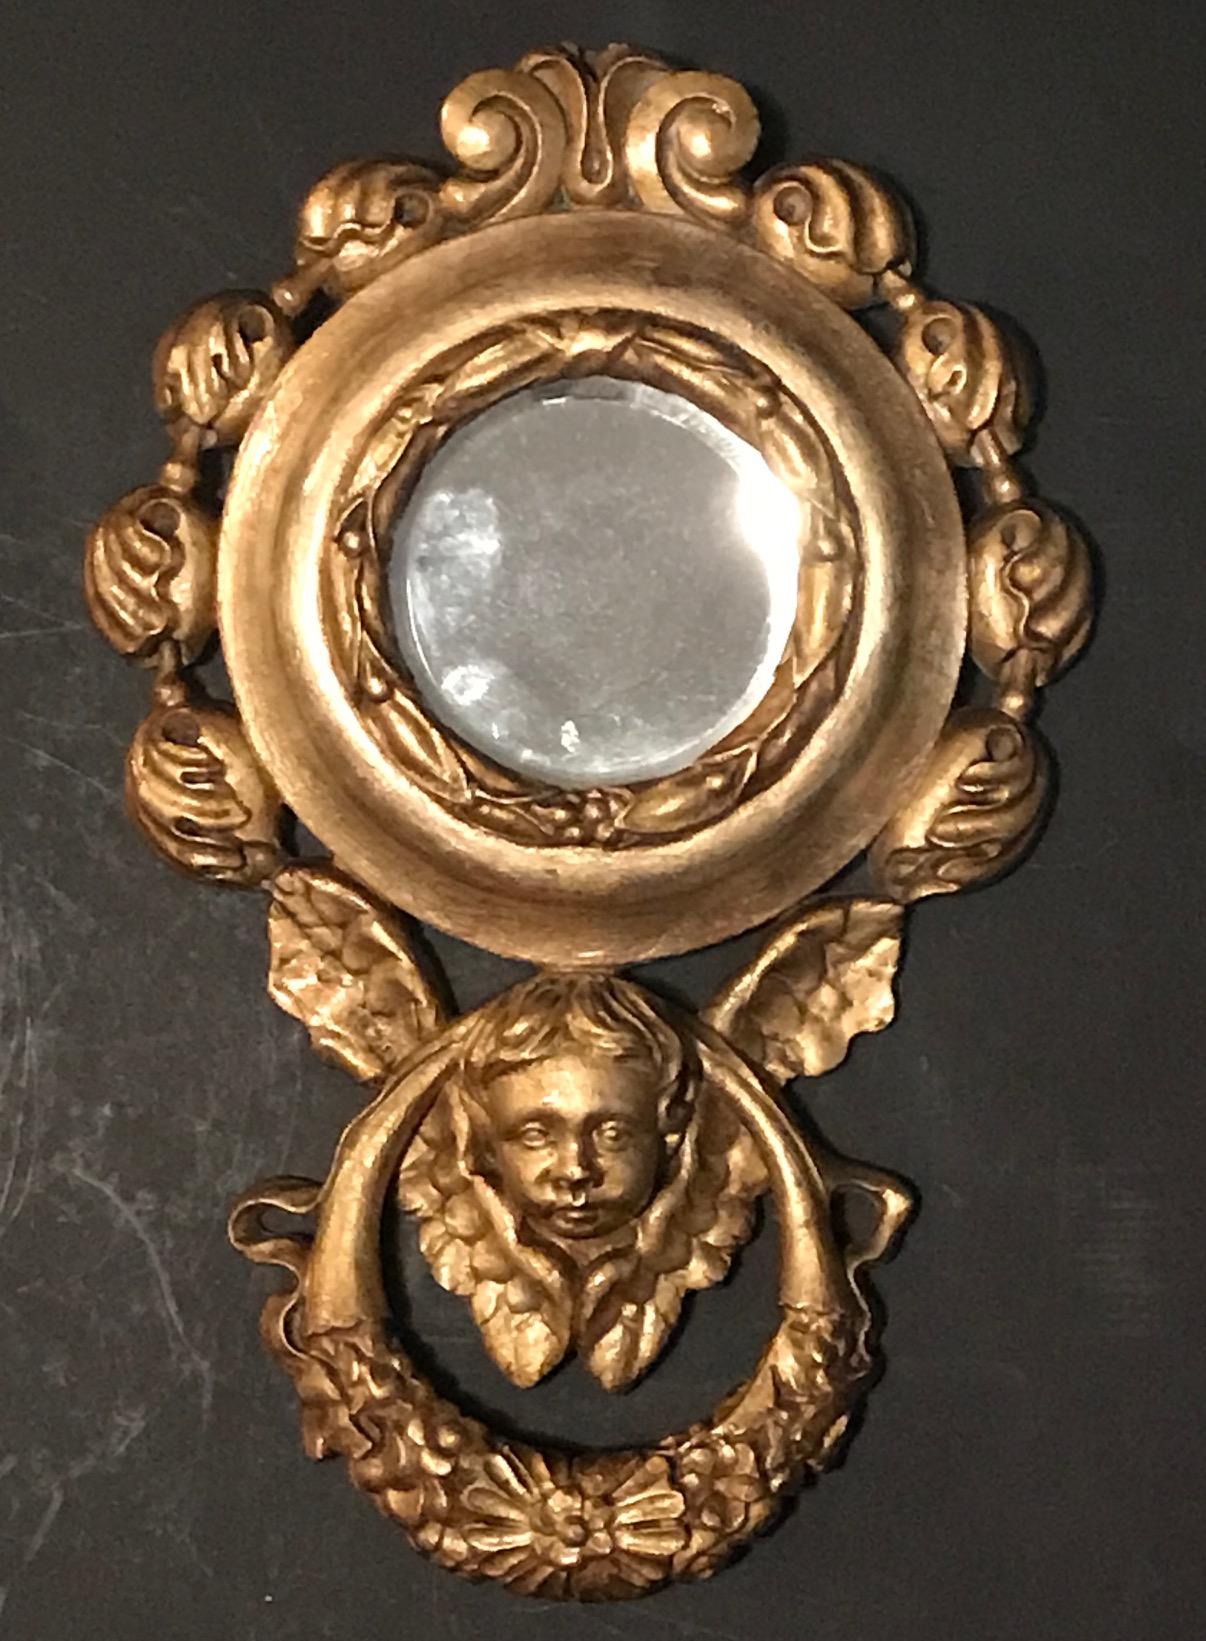 This is a beautiful pair of hand carved and gilded wall mirrors. They are created around the turn of the century. The mirrors in a circular shape are surrounded with carved floral ornaments. A winged putto inside a garland is on the lower end of